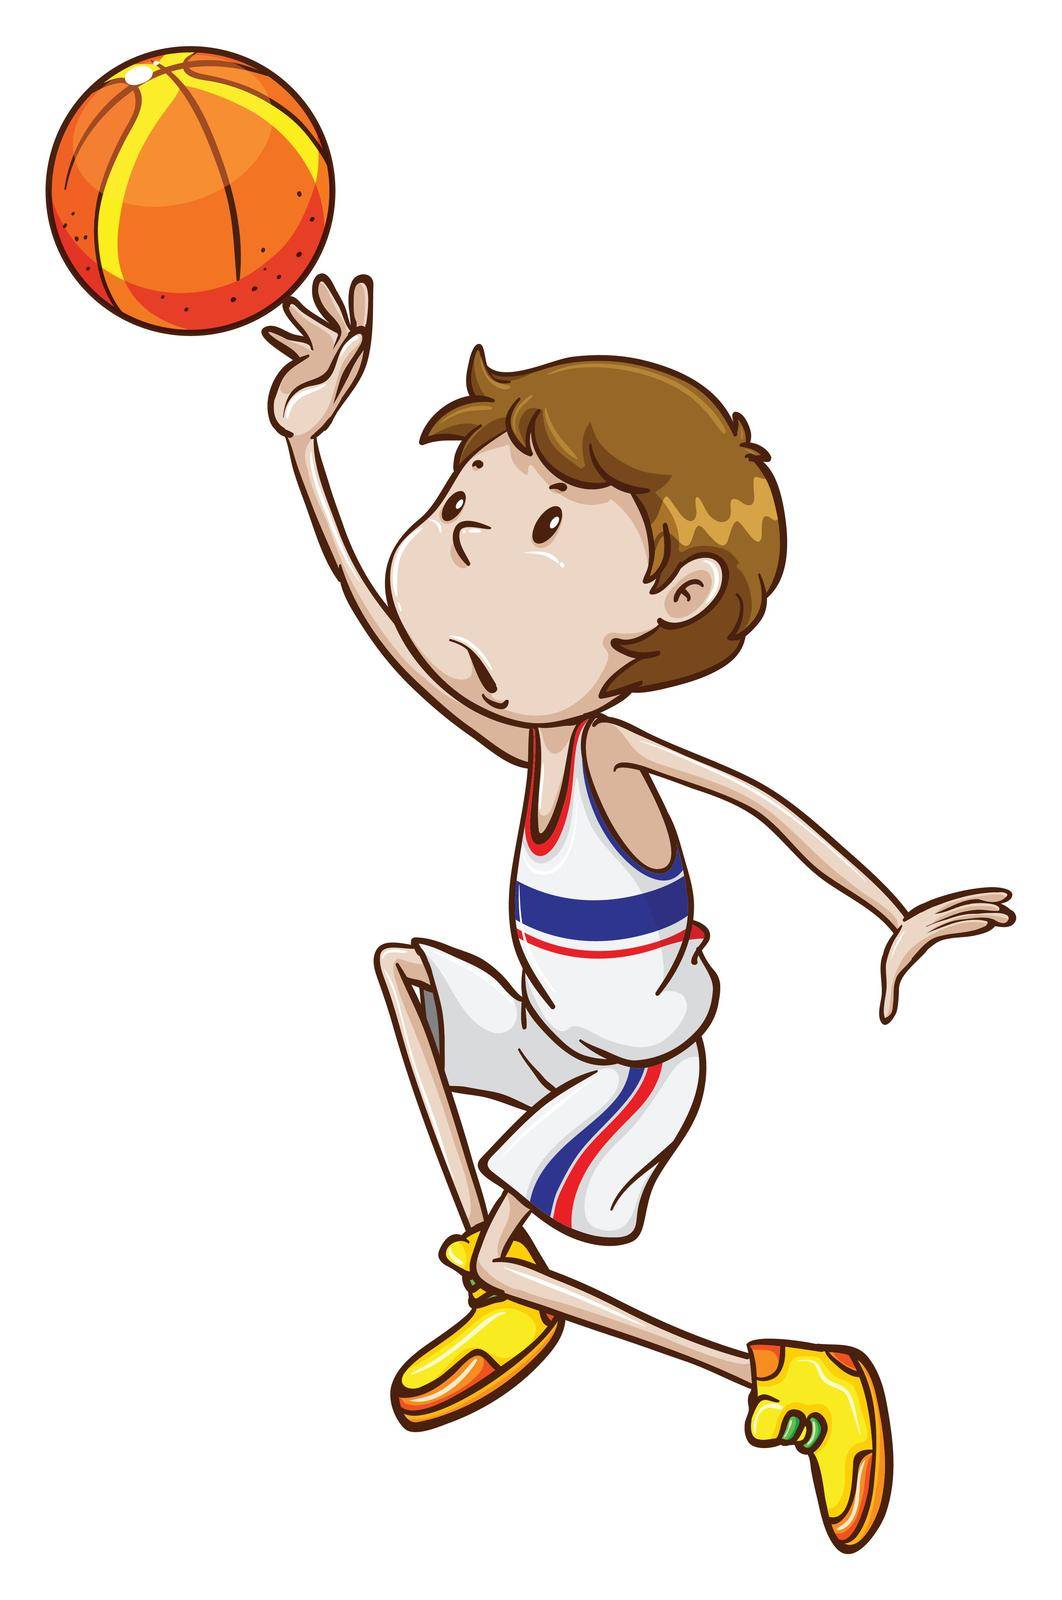 Illustration of a young basketball player on a white background